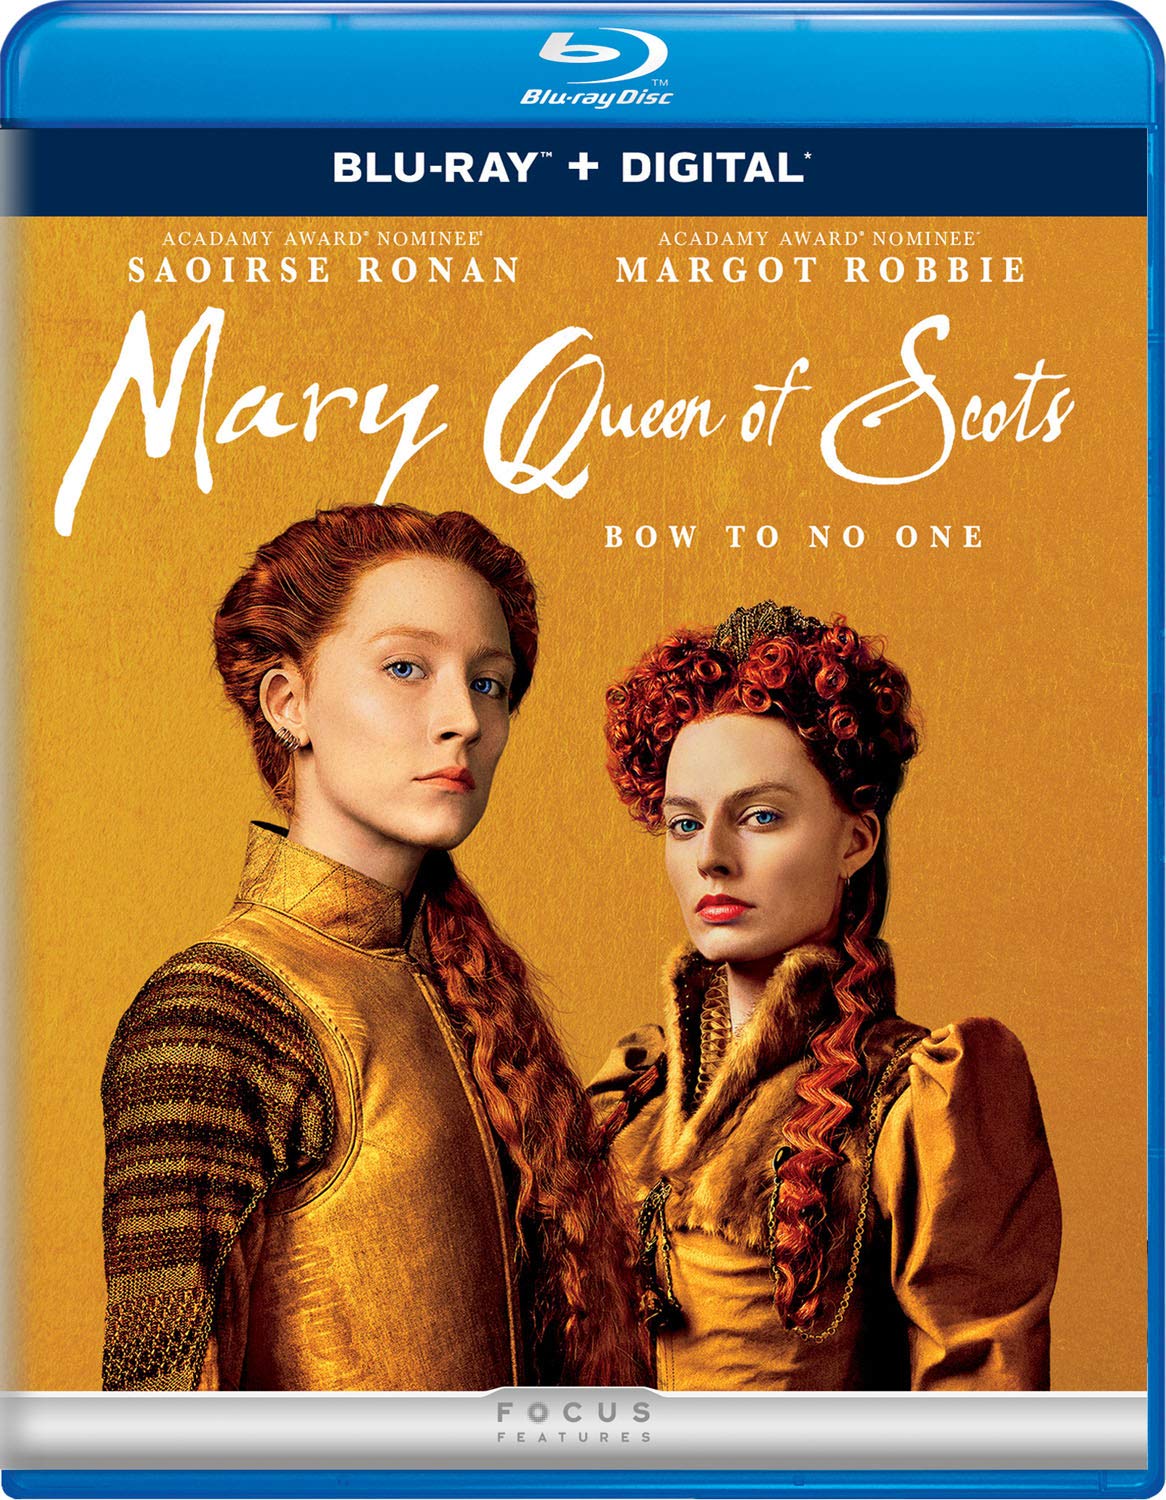 Mary Queen of Scots DVD Release Date February 26, 2019